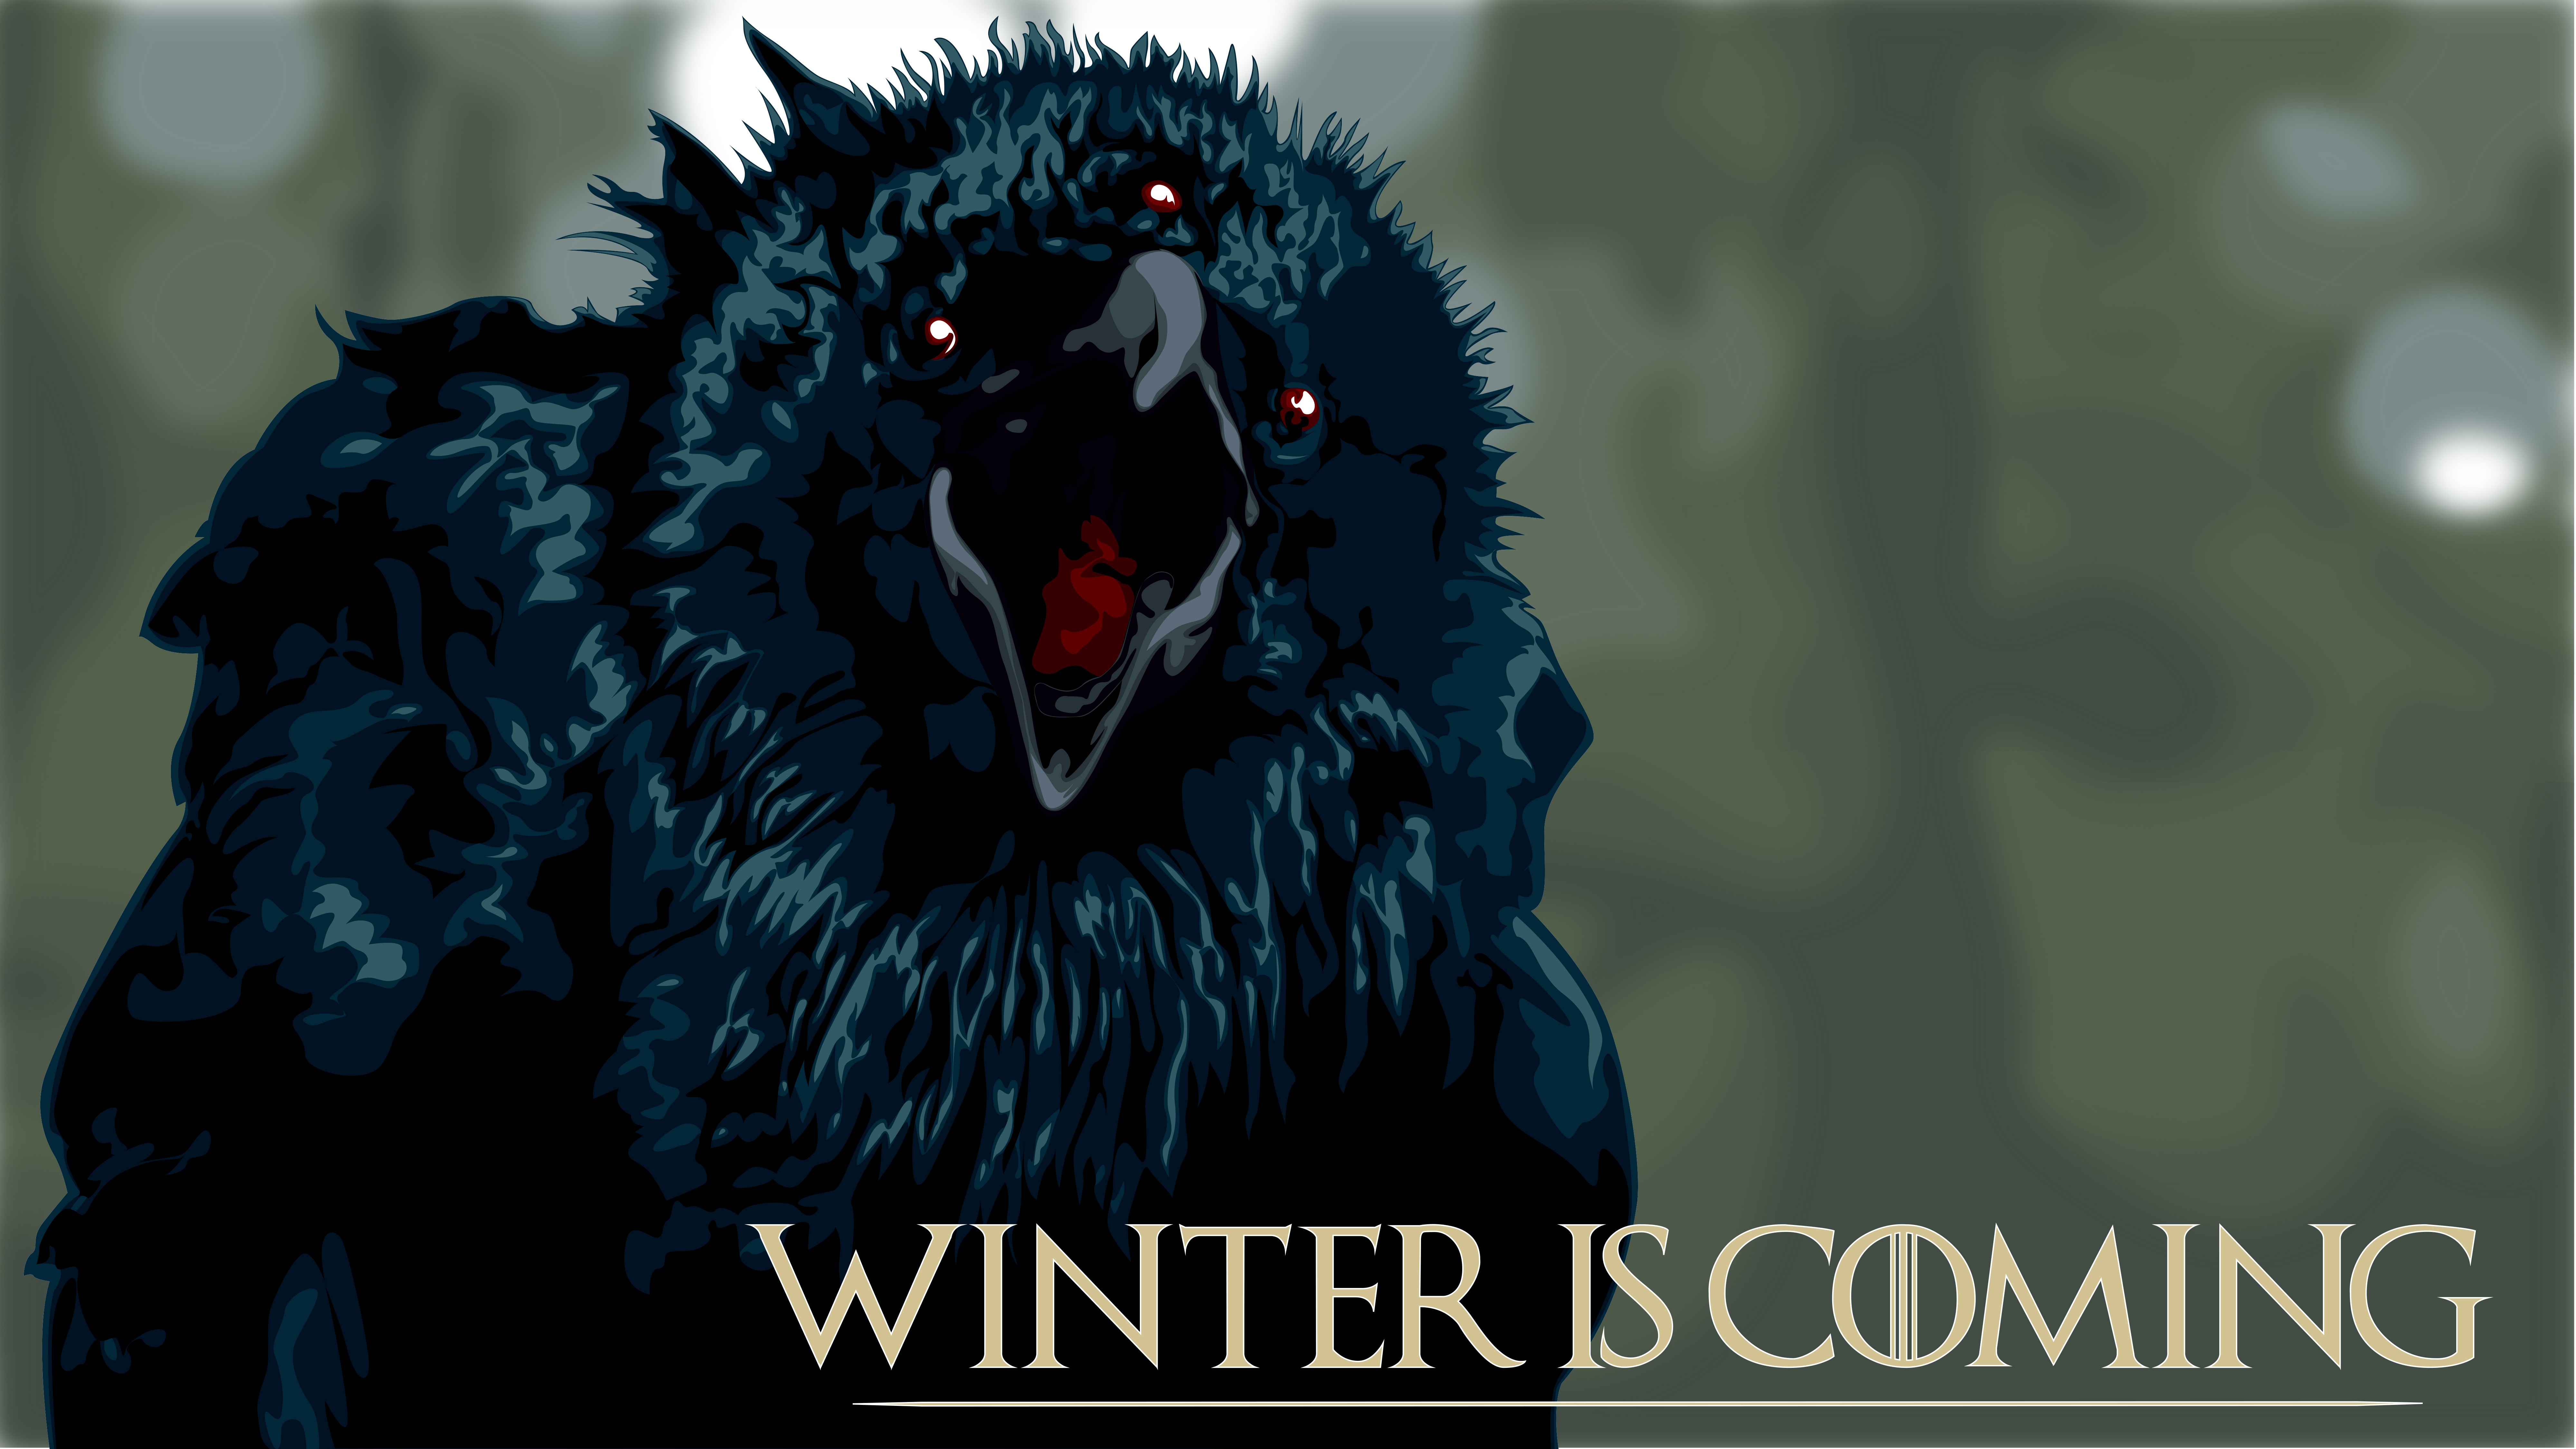 Game Of Thrones, Winter Is Coming, Crow, Three Eyed Crow Wallpaper